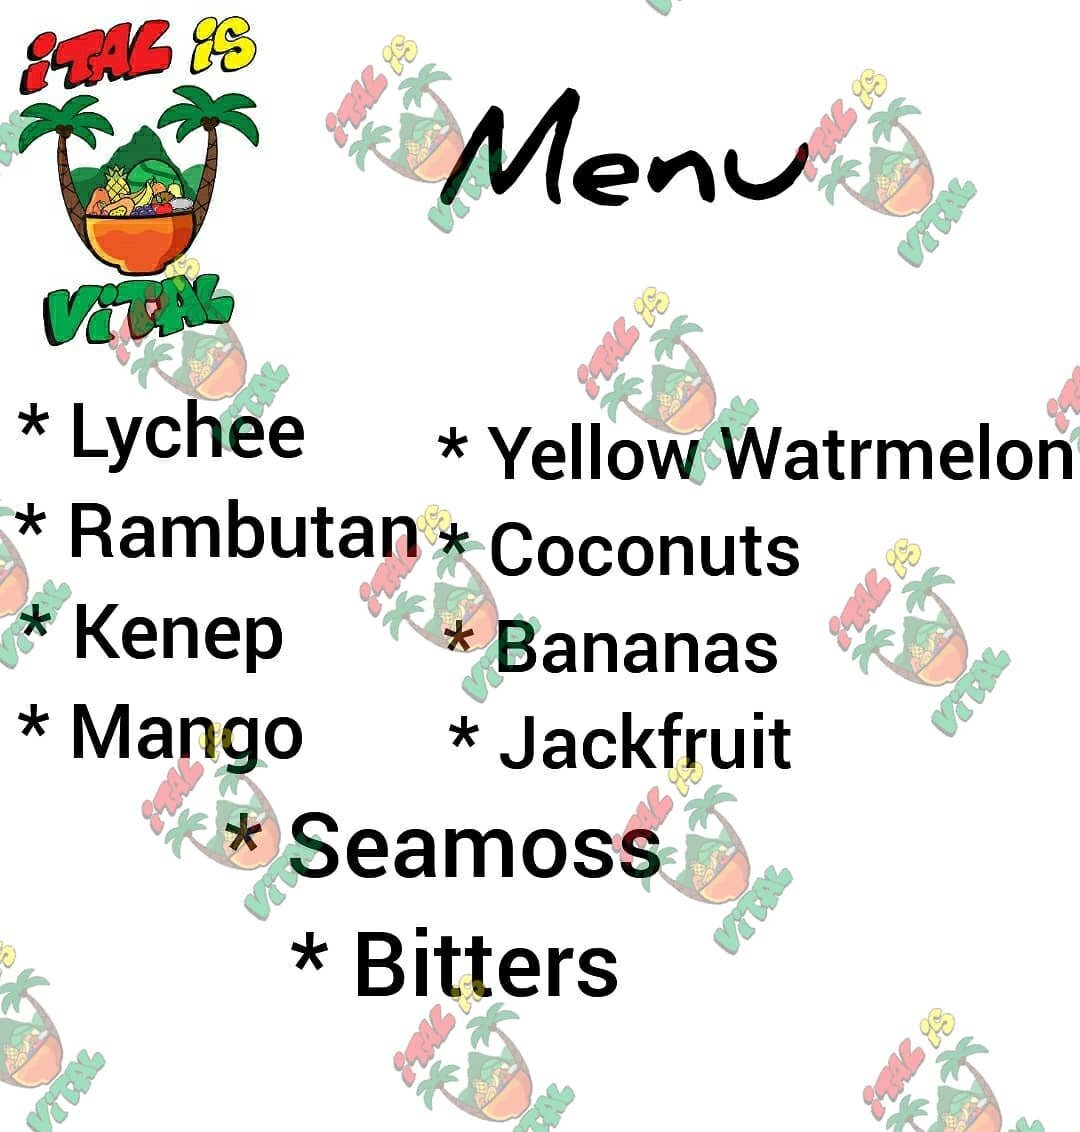 Some of our #Menu for the week.  2620 N Hiawassee Rd Orlando FL #HealthStand where your #HealthIsWealth Thursday to Saturday 11am to 6pm outside of the Max Plaza entrance
 Look for the blue tent #italisvital407